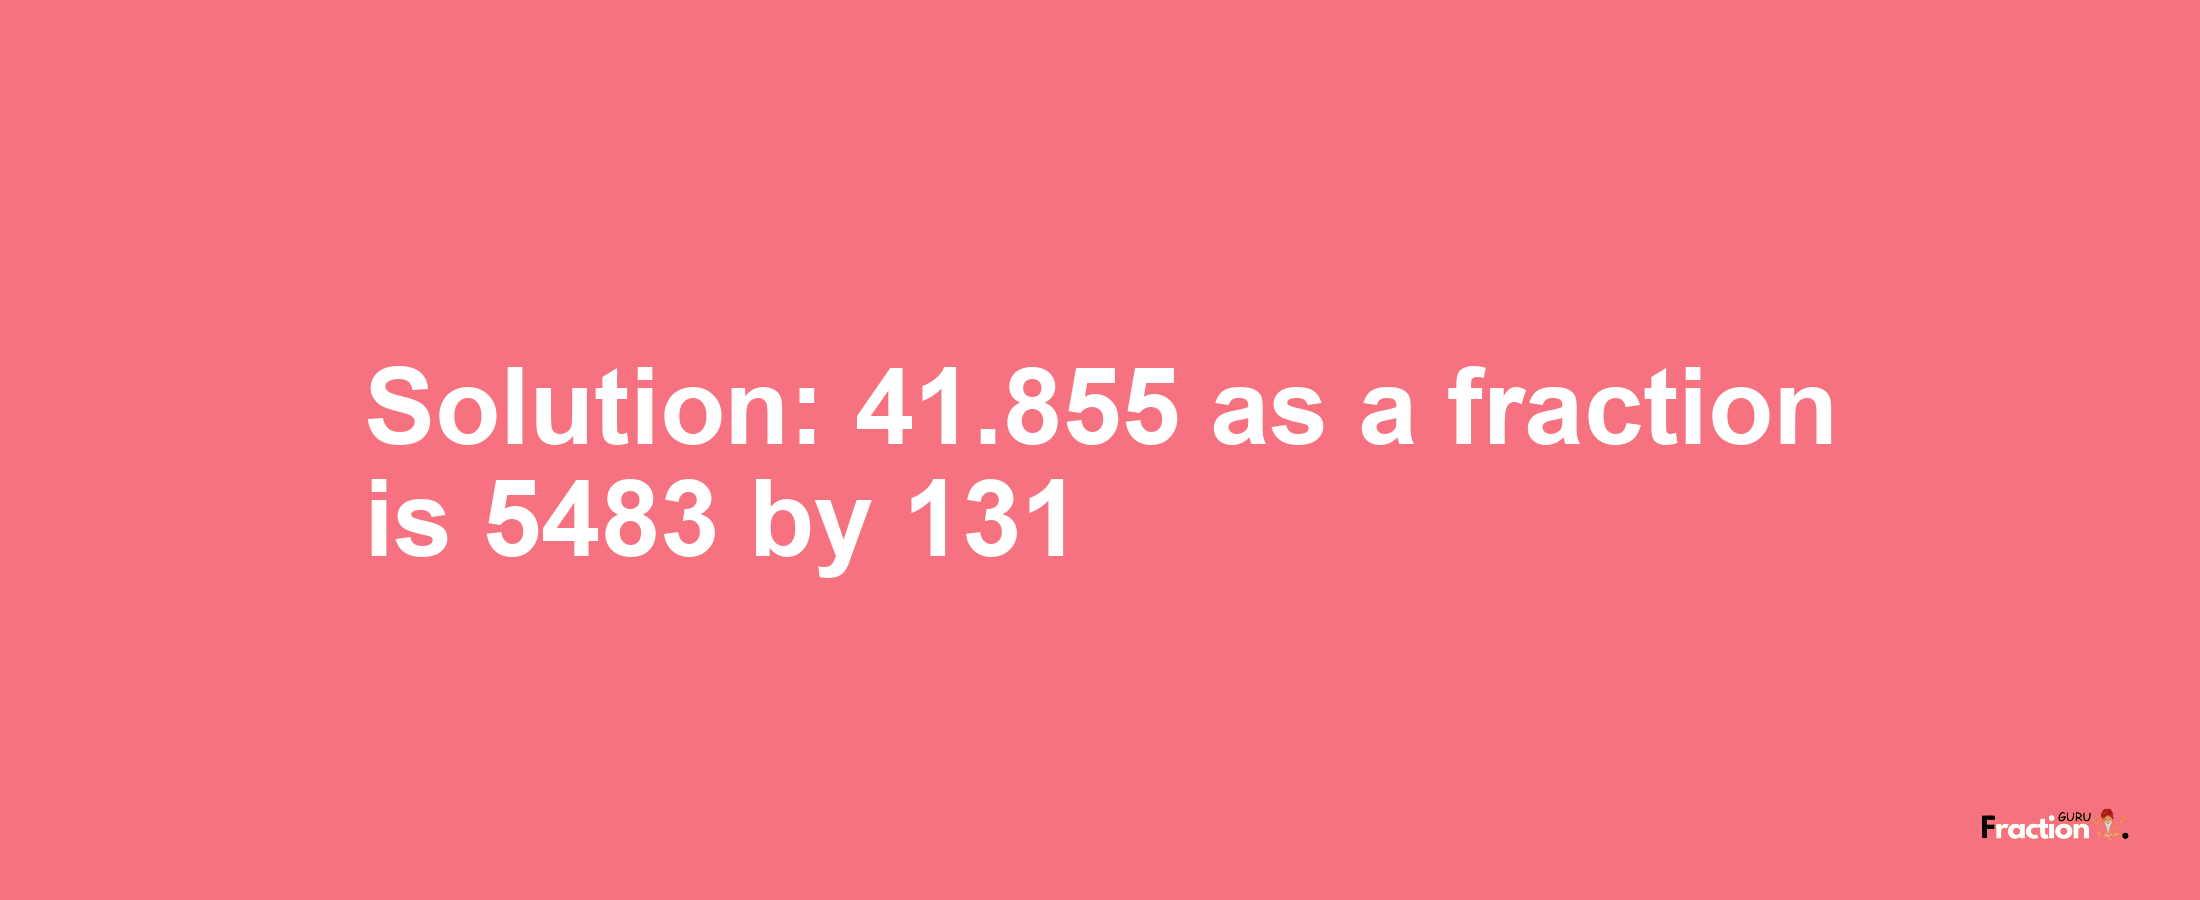 Solution:41.855 as a fraction is 5483/131